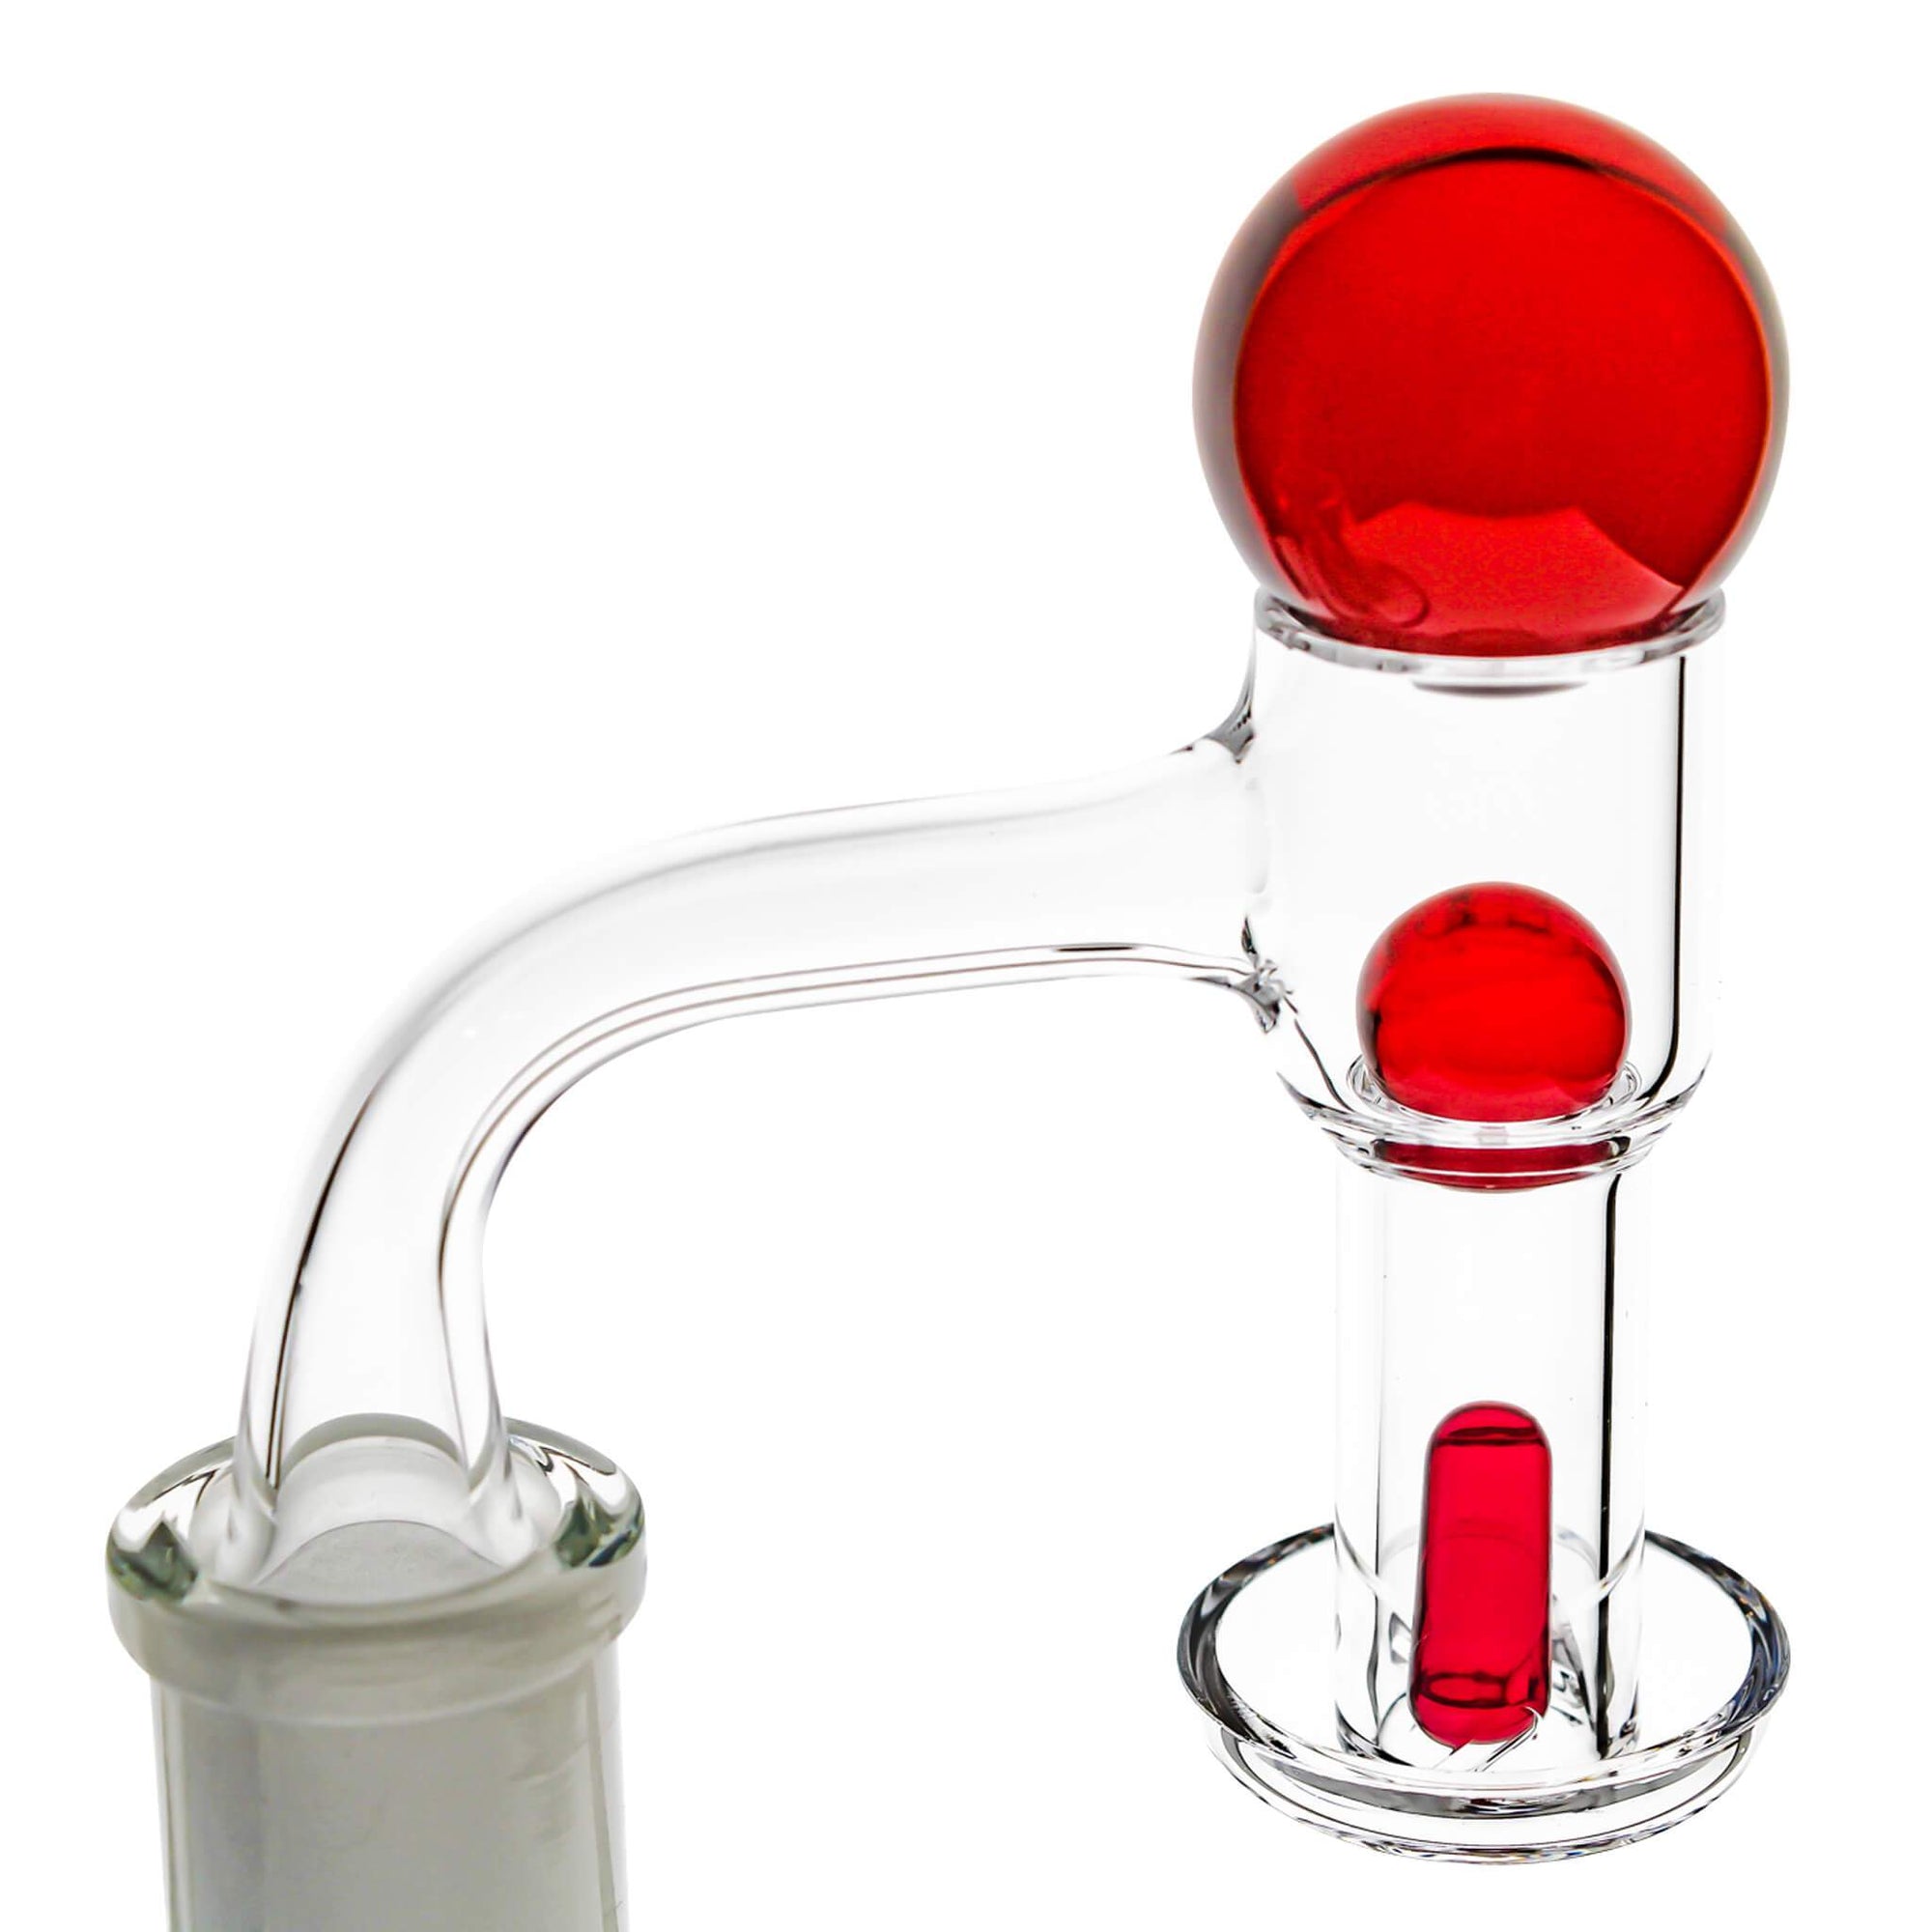 Full Weld Terp Slurper Tall VacTube Banger Kit | Marble & Ruby Stack View | the dabbing specialists